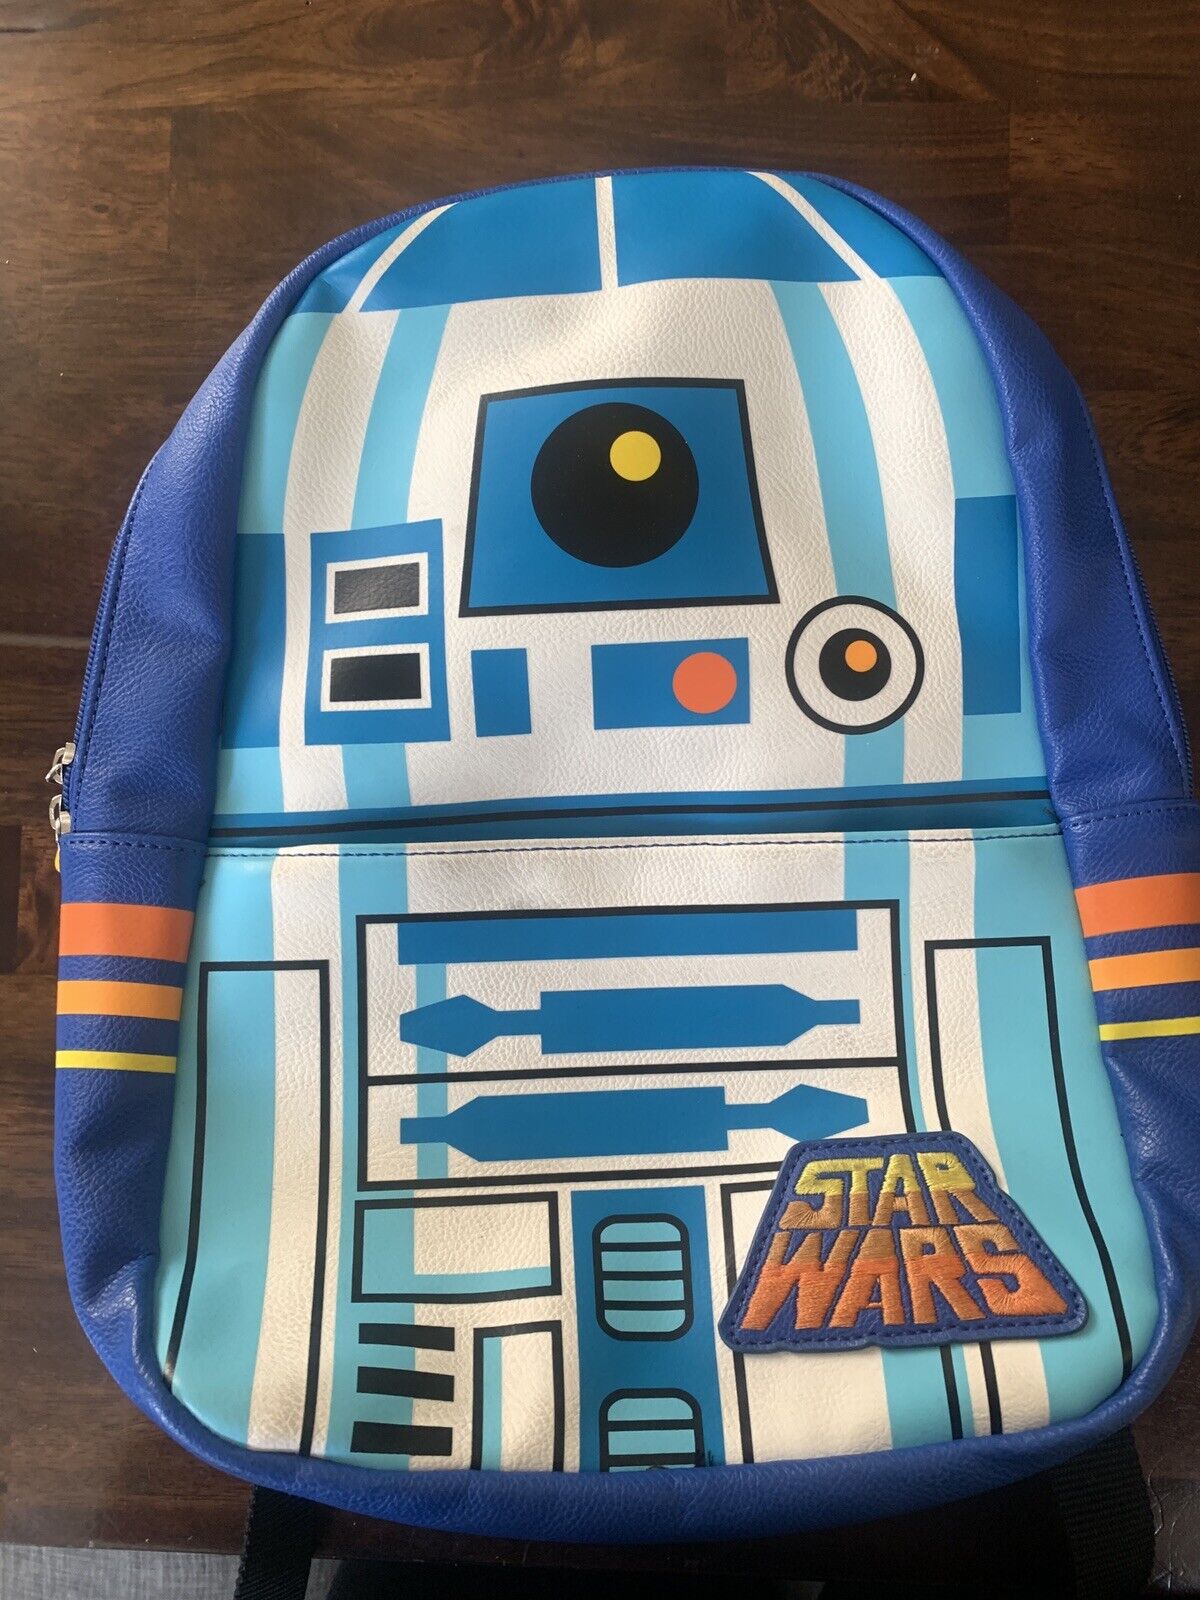 Star Wars R2D2 Backpack Simulated Leather 13x10x4 Funko LLC Excellent Condition